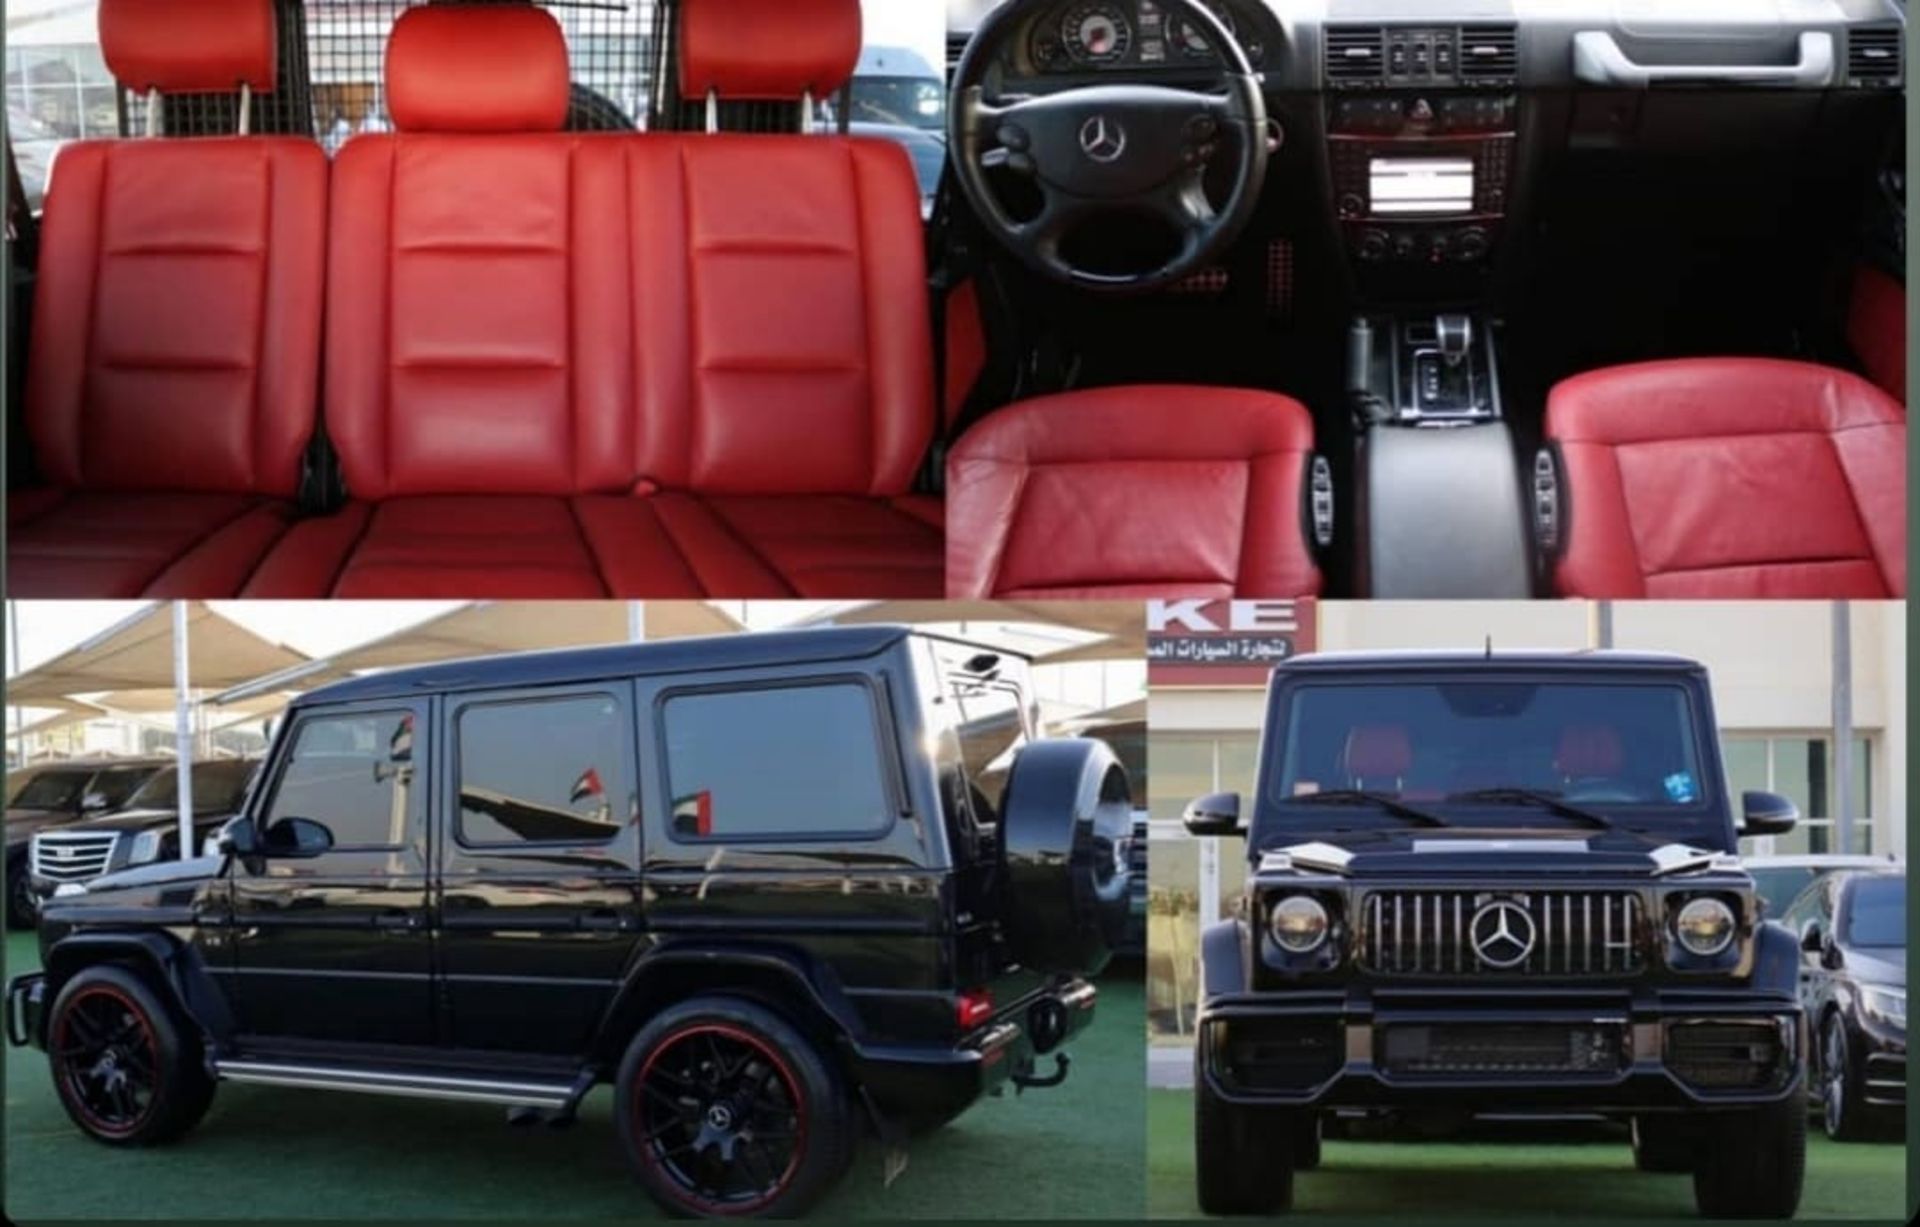 2011 MERCEDES G WAGON G55 changed to a 2020 G63 look Full outside exterior complete package !! - Image 8 of 36